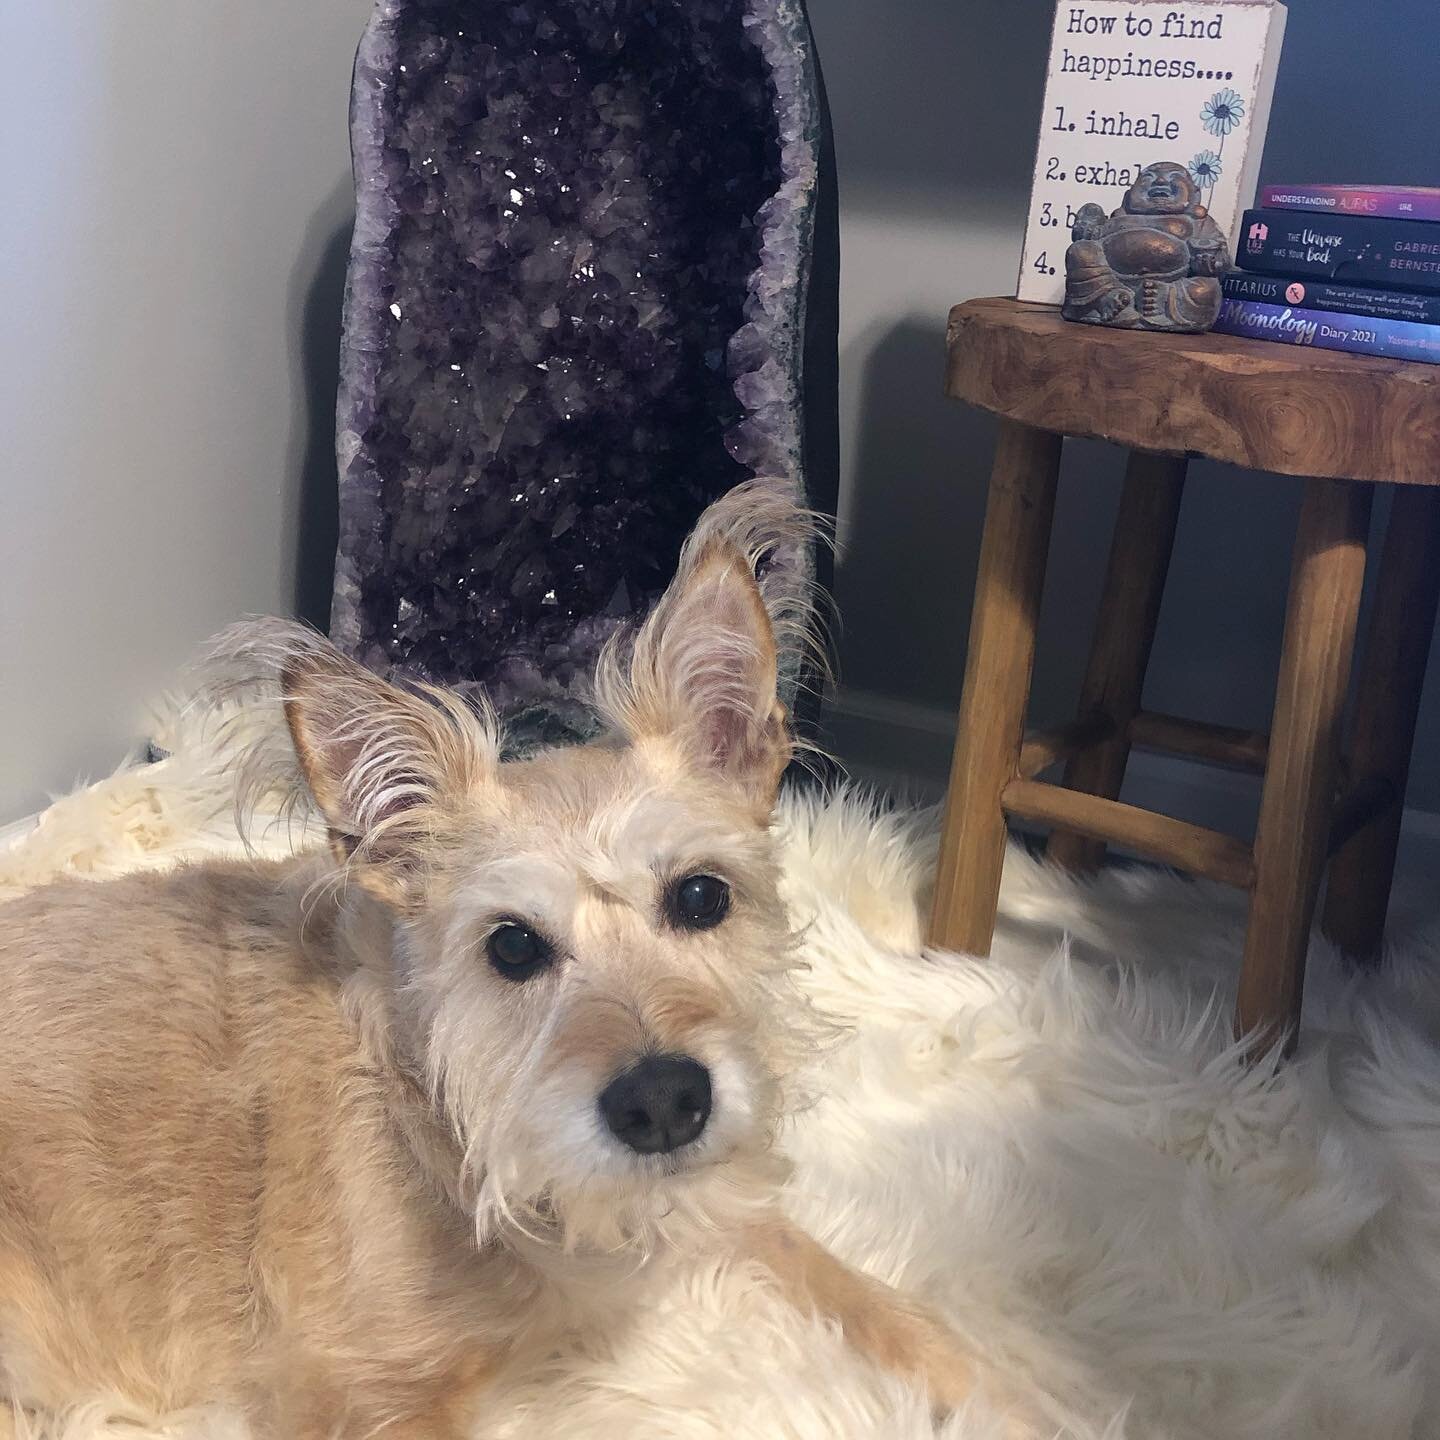 Anyone else have a problem with their dog hogging their meditation space? No? Just me? 😂

A few weeks ago I received a call from my reiki teacher who wanted to gift me this amazing amethyst for my birthday. She knew that I was drawn to it every time